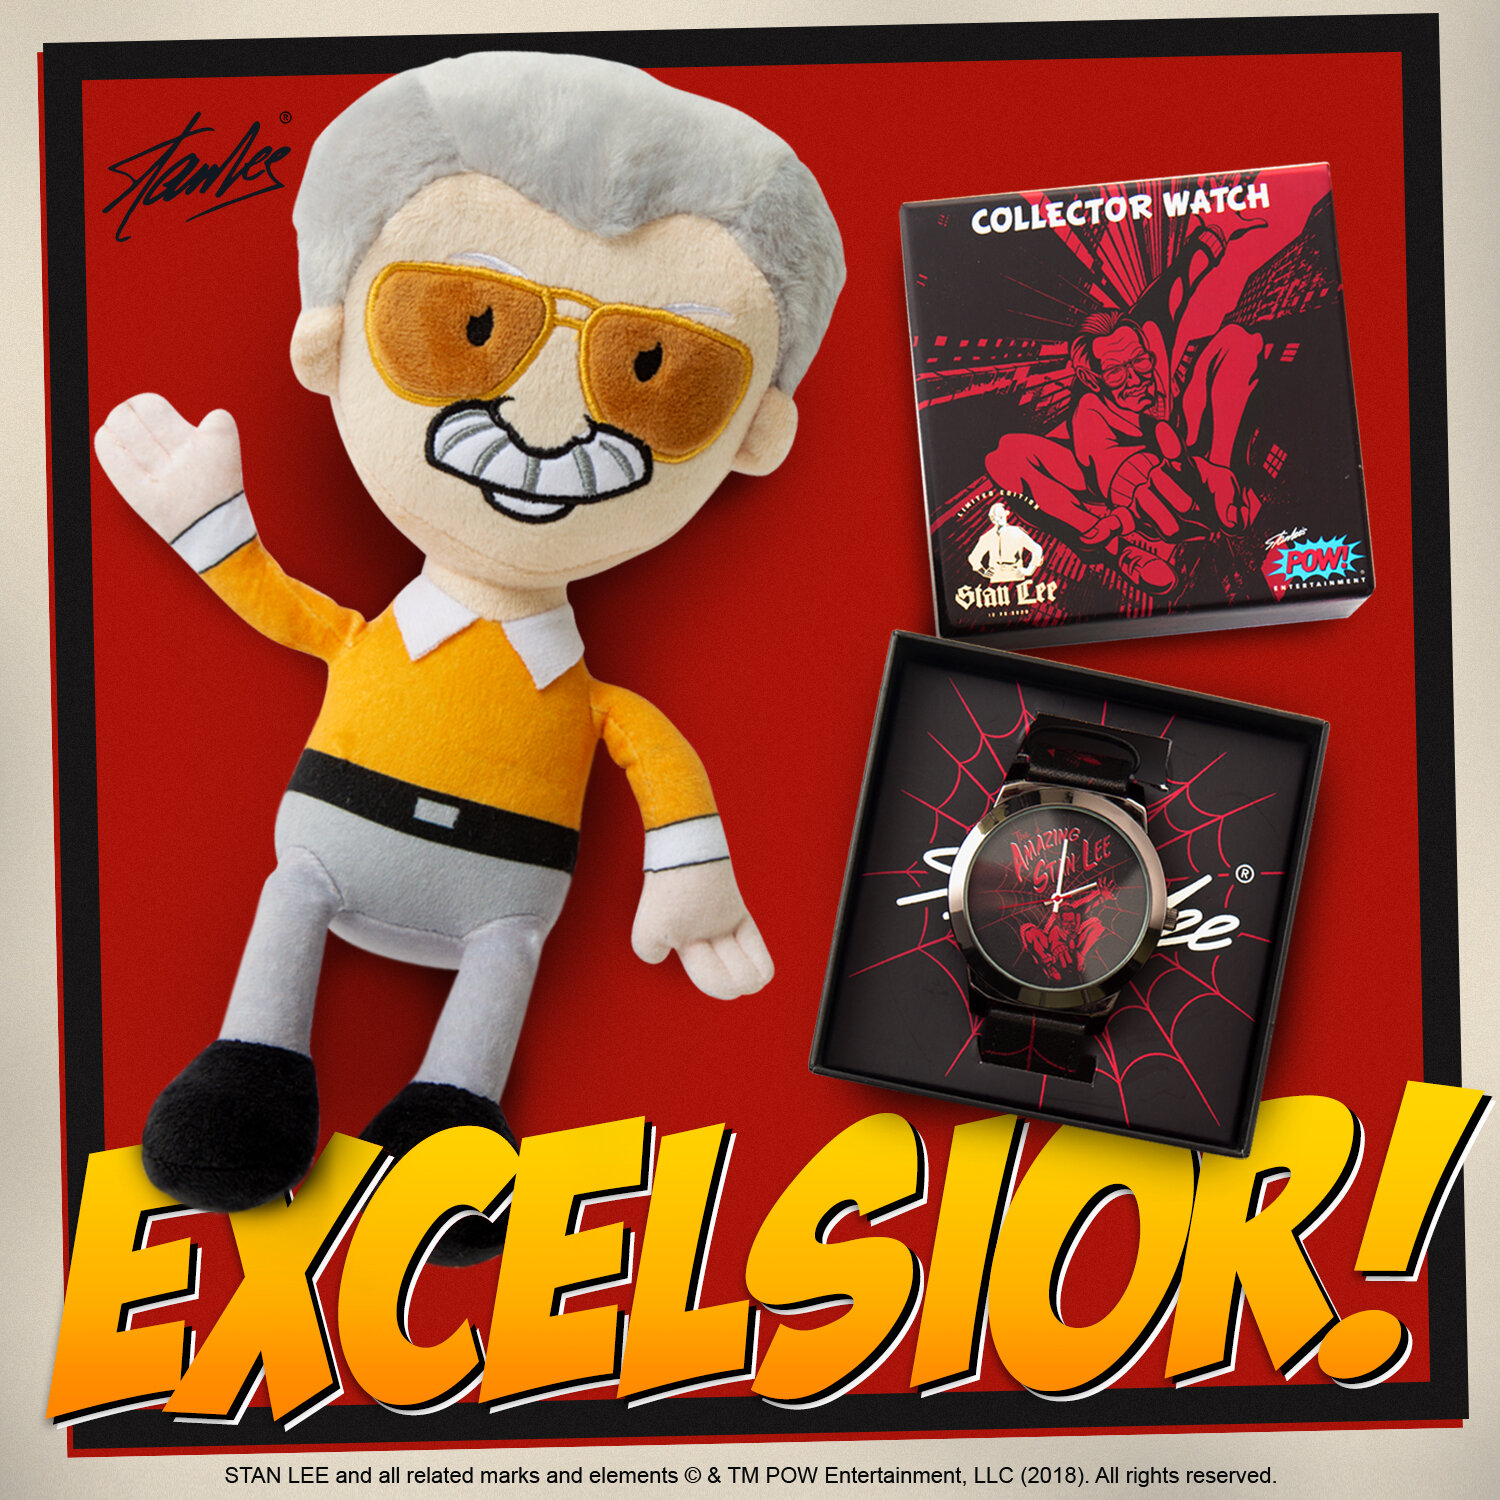 Save 10% on the Stan Lee Plush Doll and Collectable Watch! Hurry, expires November 28. Promo Code: STANLEEBF - Link in Bio

 #mightymojotoys #blackfridaydeals #blackfriday2022 #blackfriday #plushies #blackfridayweekend #plushtoys #stanlee #excelsior